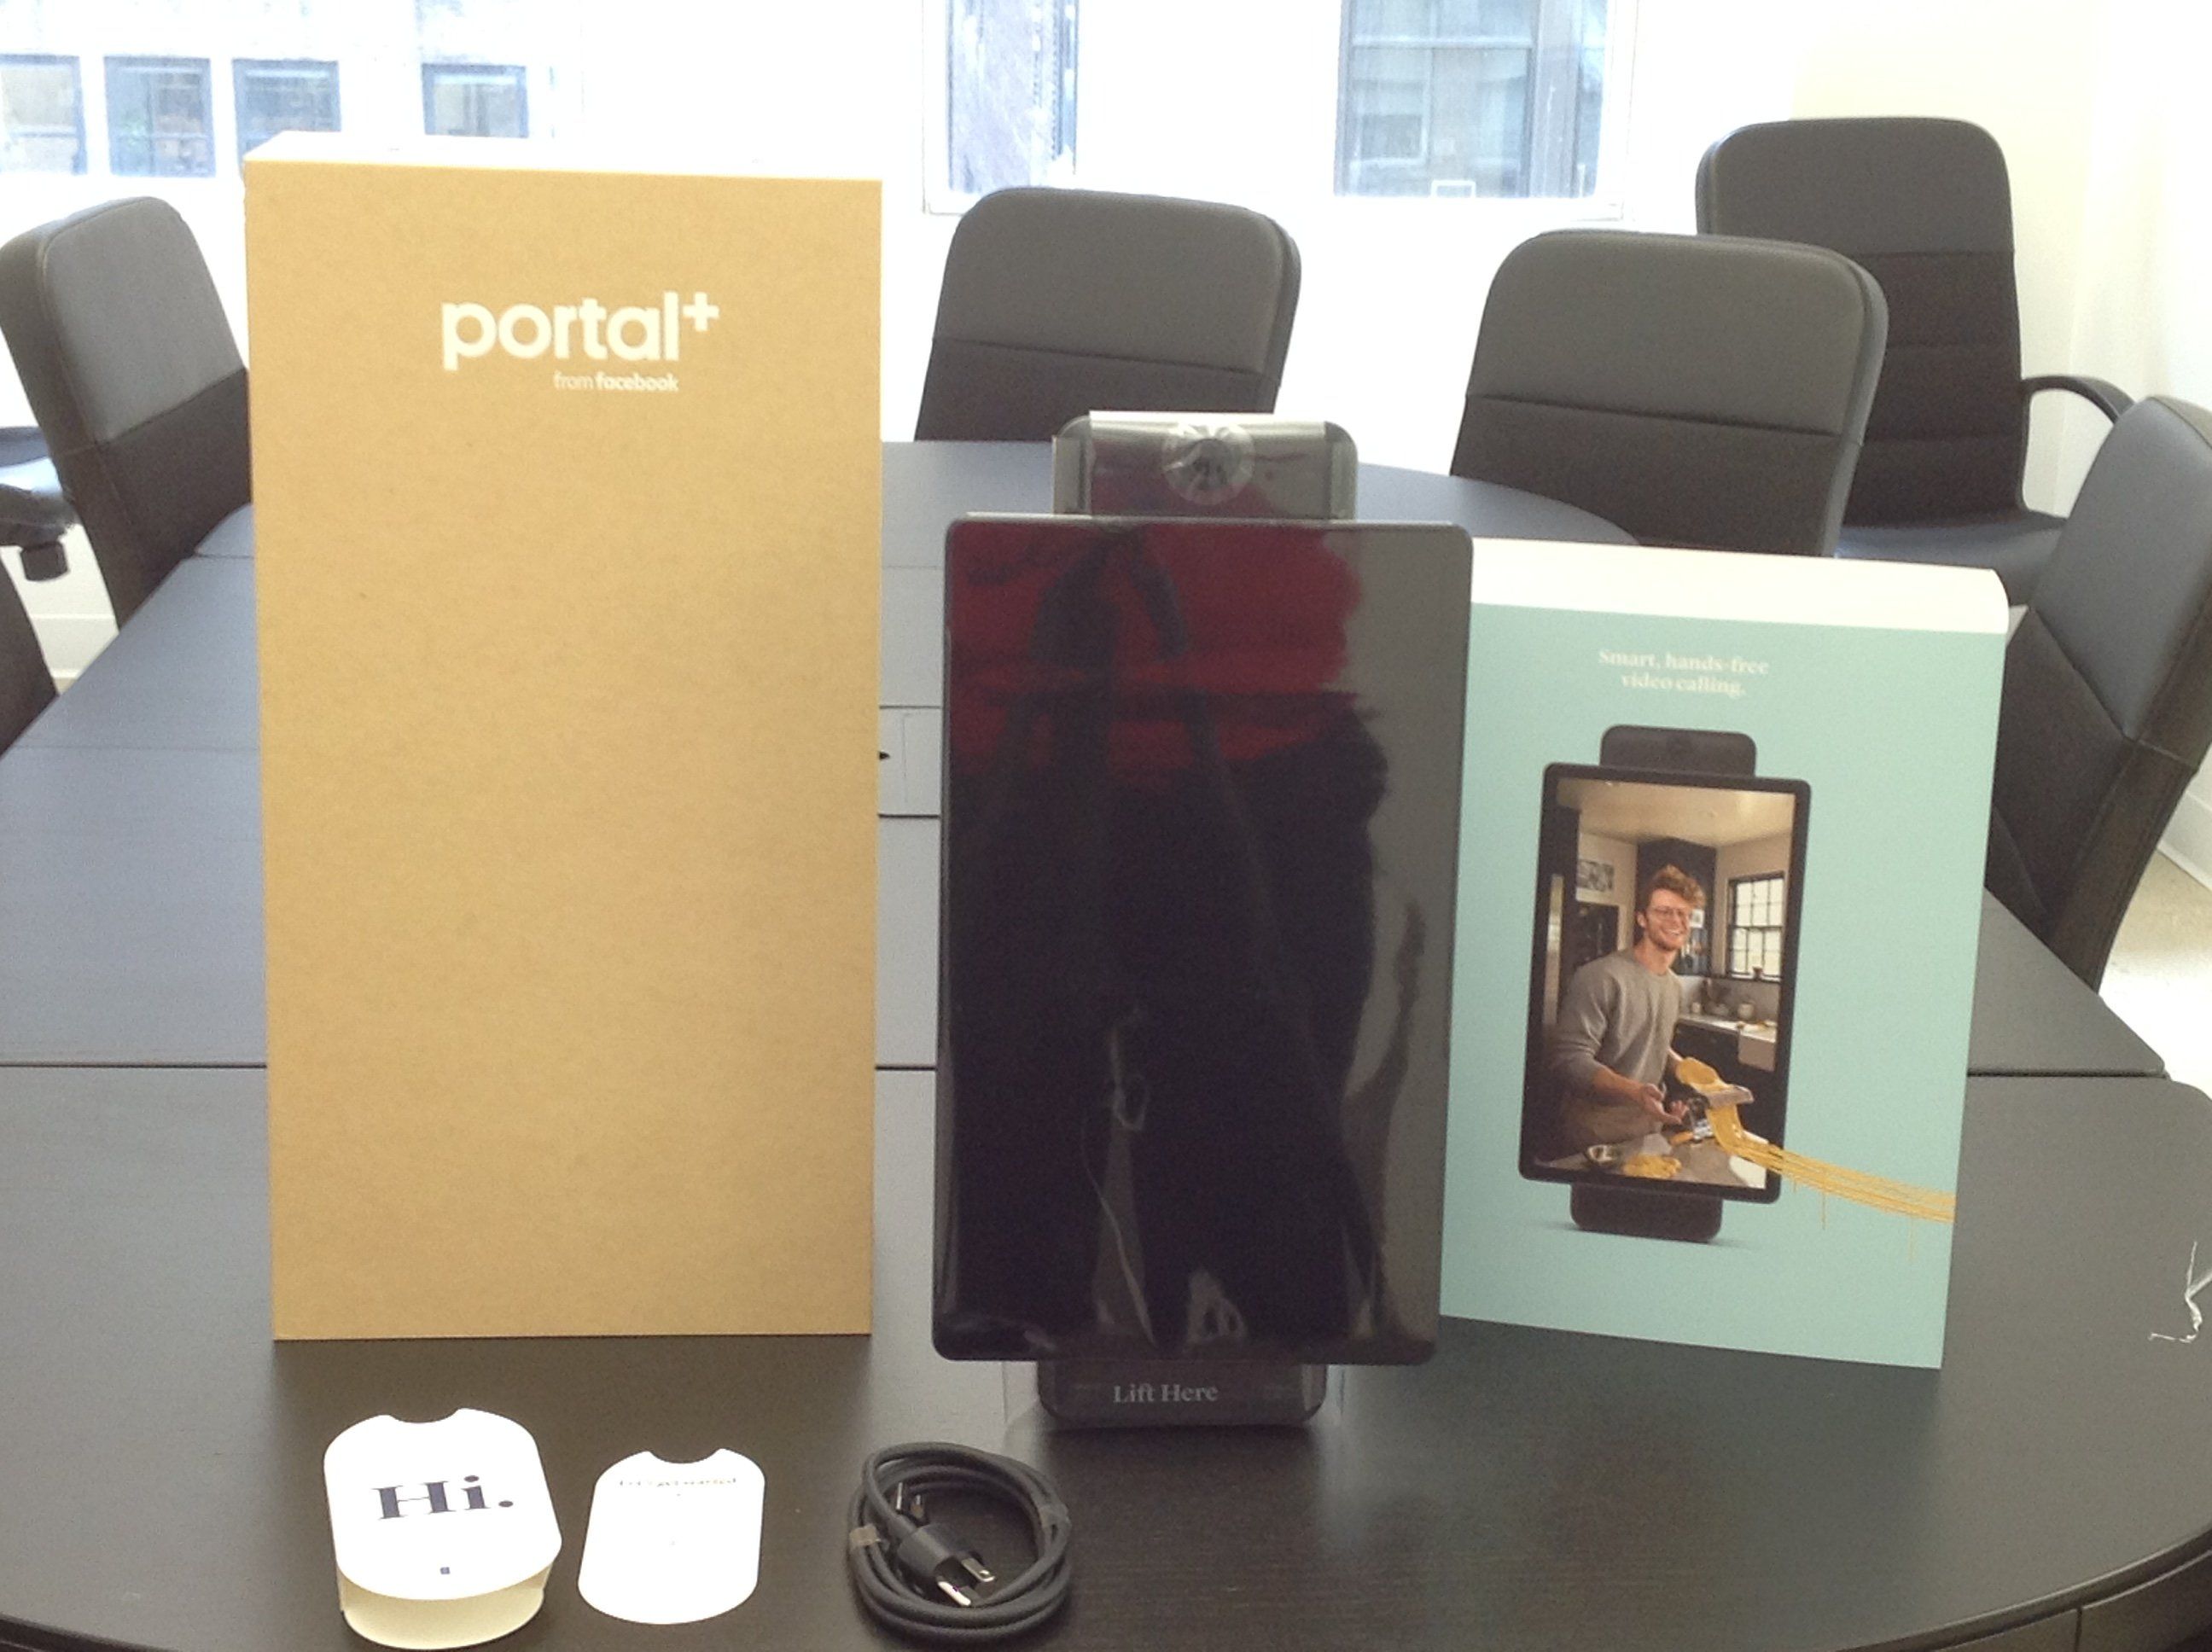 A photo of Facebook Portal Plus unboxed on a conference table